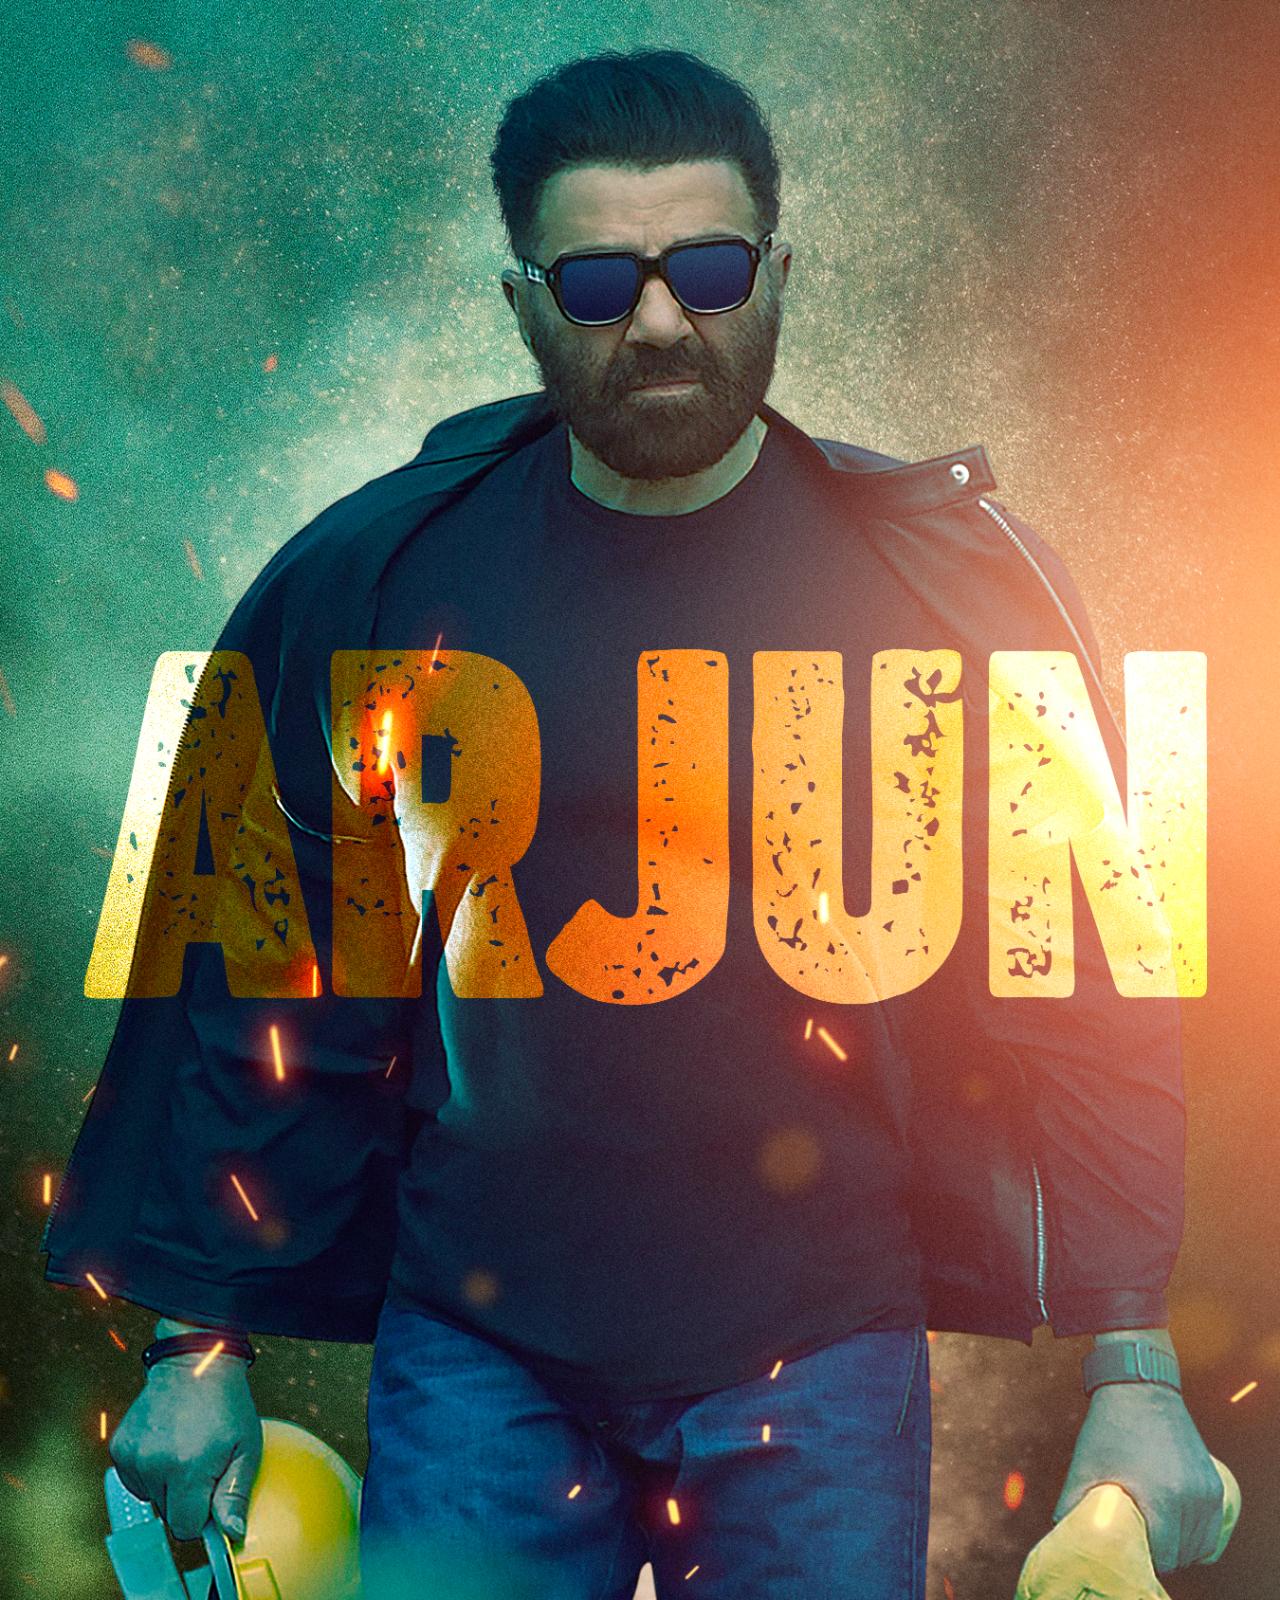 Sunny Deol will be seen playing the role of Arjun in this action thriller